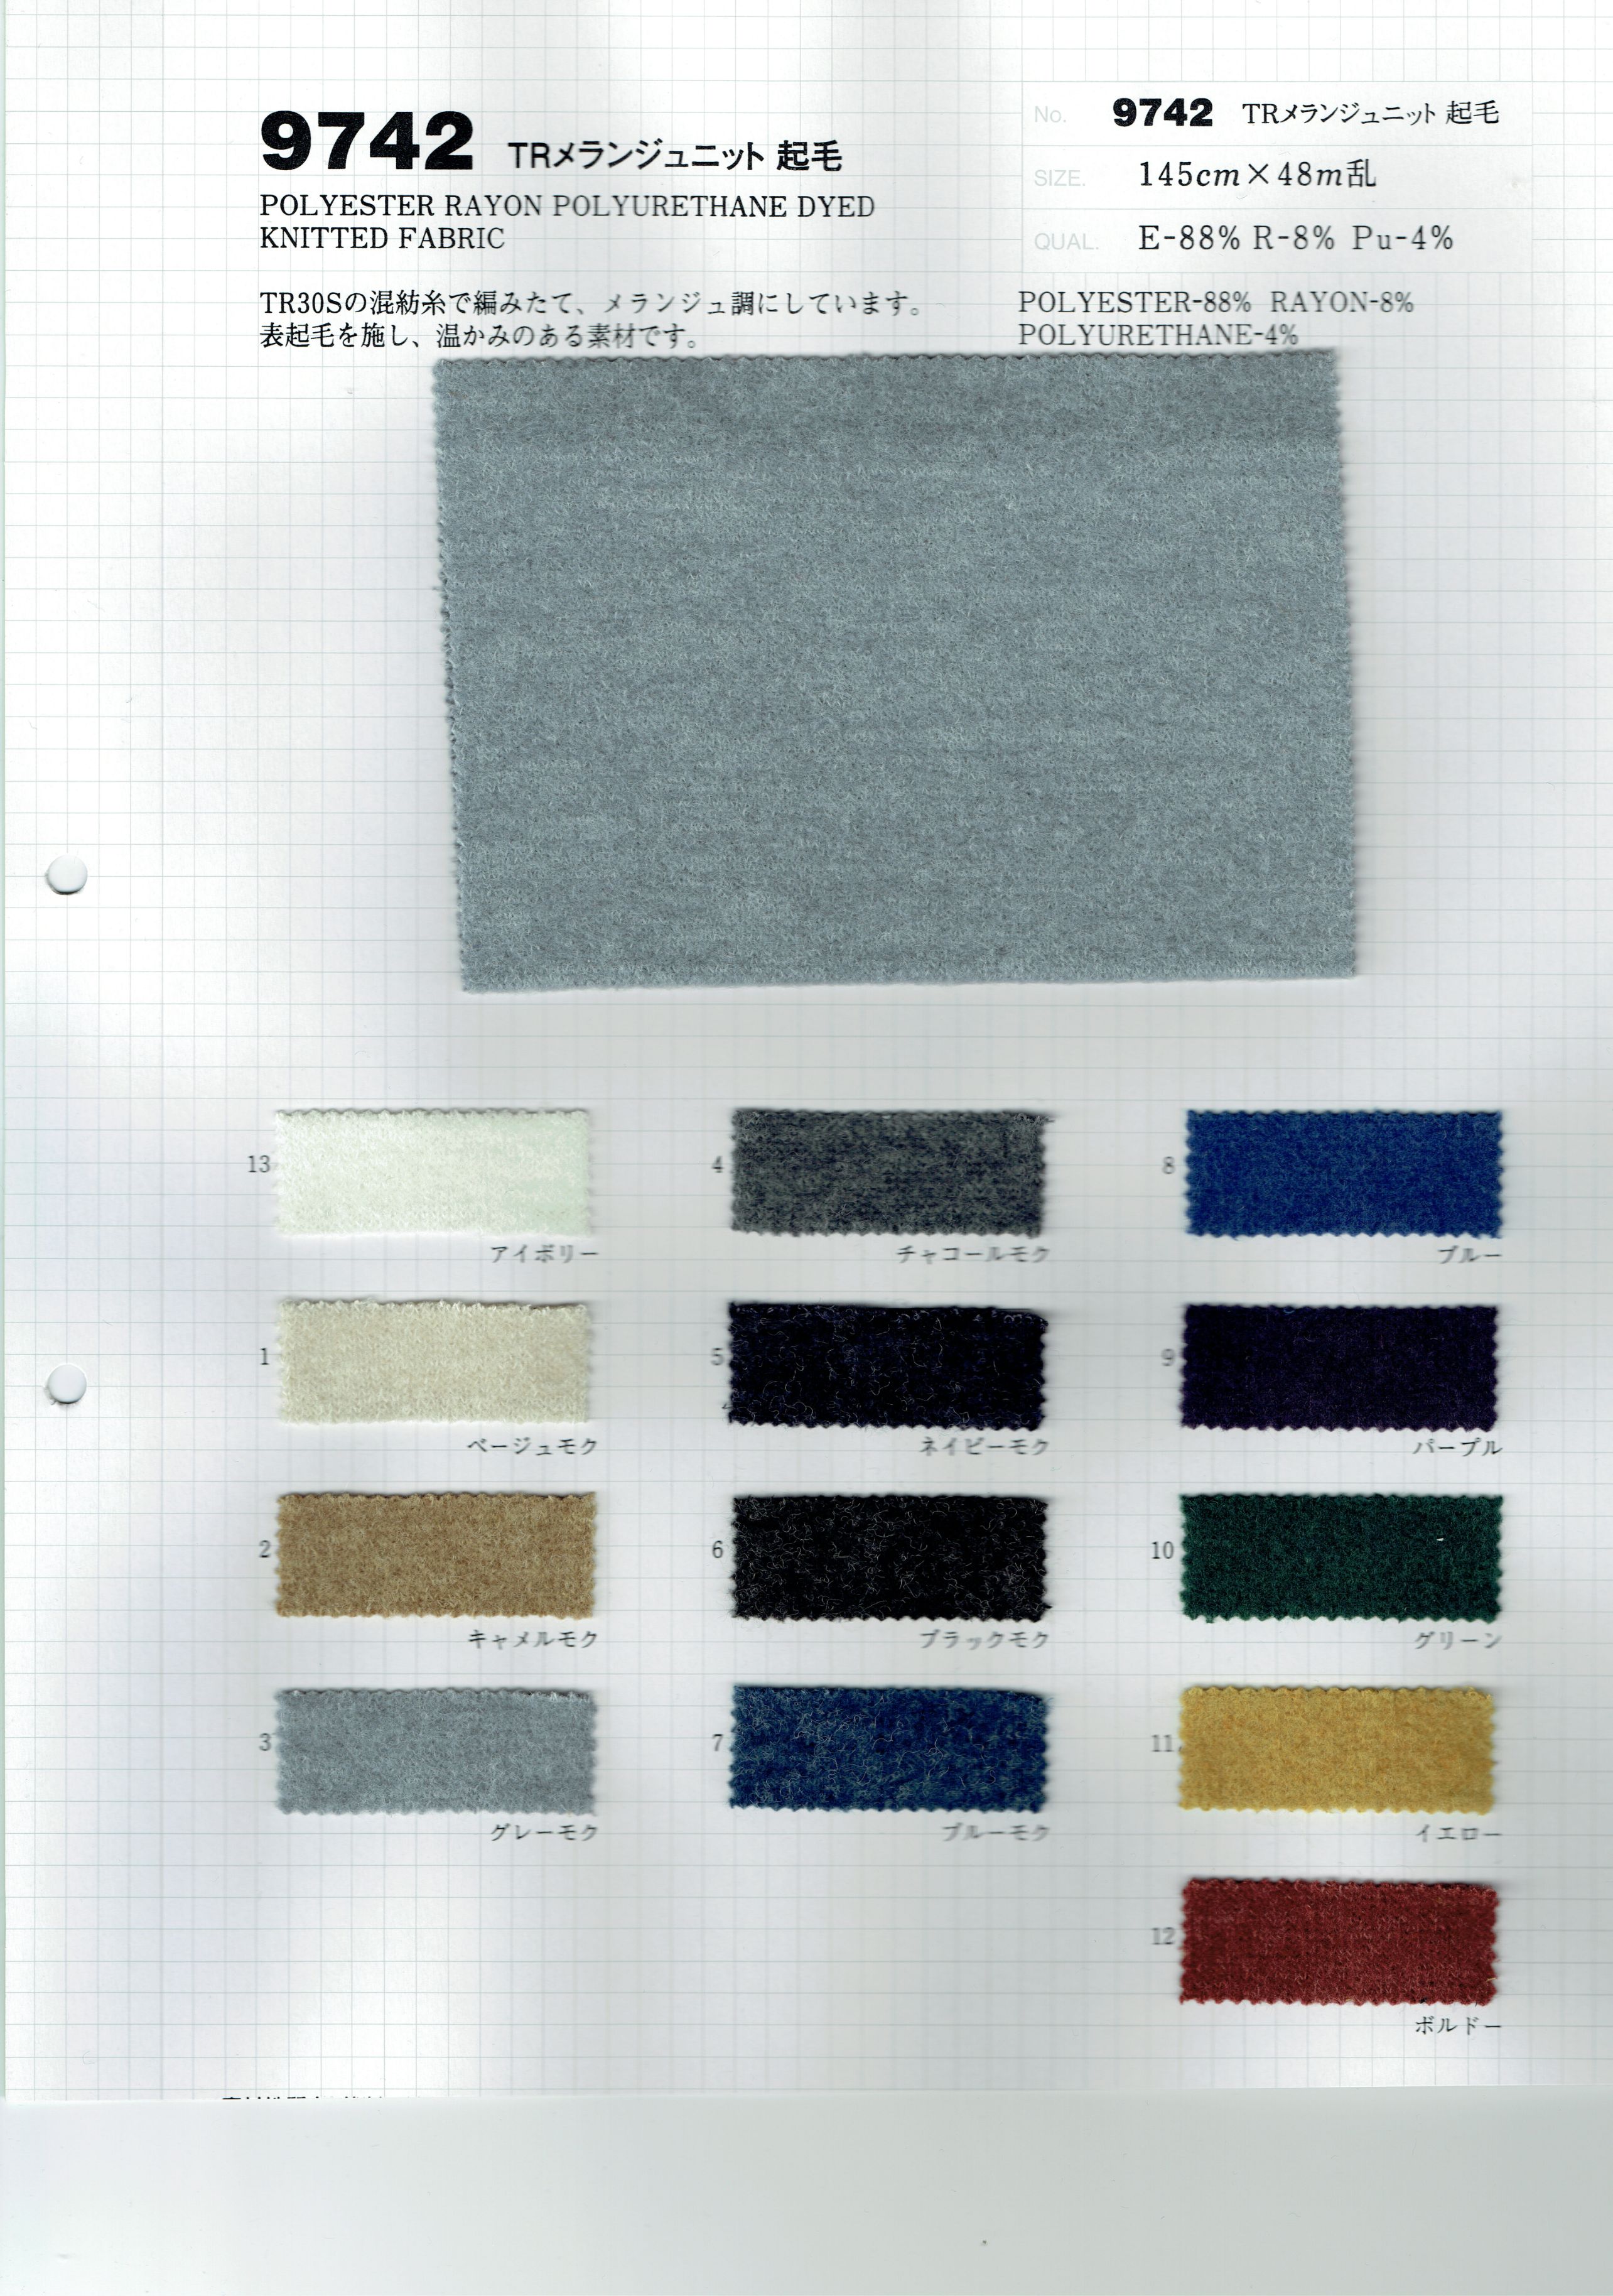 View 88% POLYESTER 8% RAYON 4% POLYURETHANE DYED KNITTED FABRIC